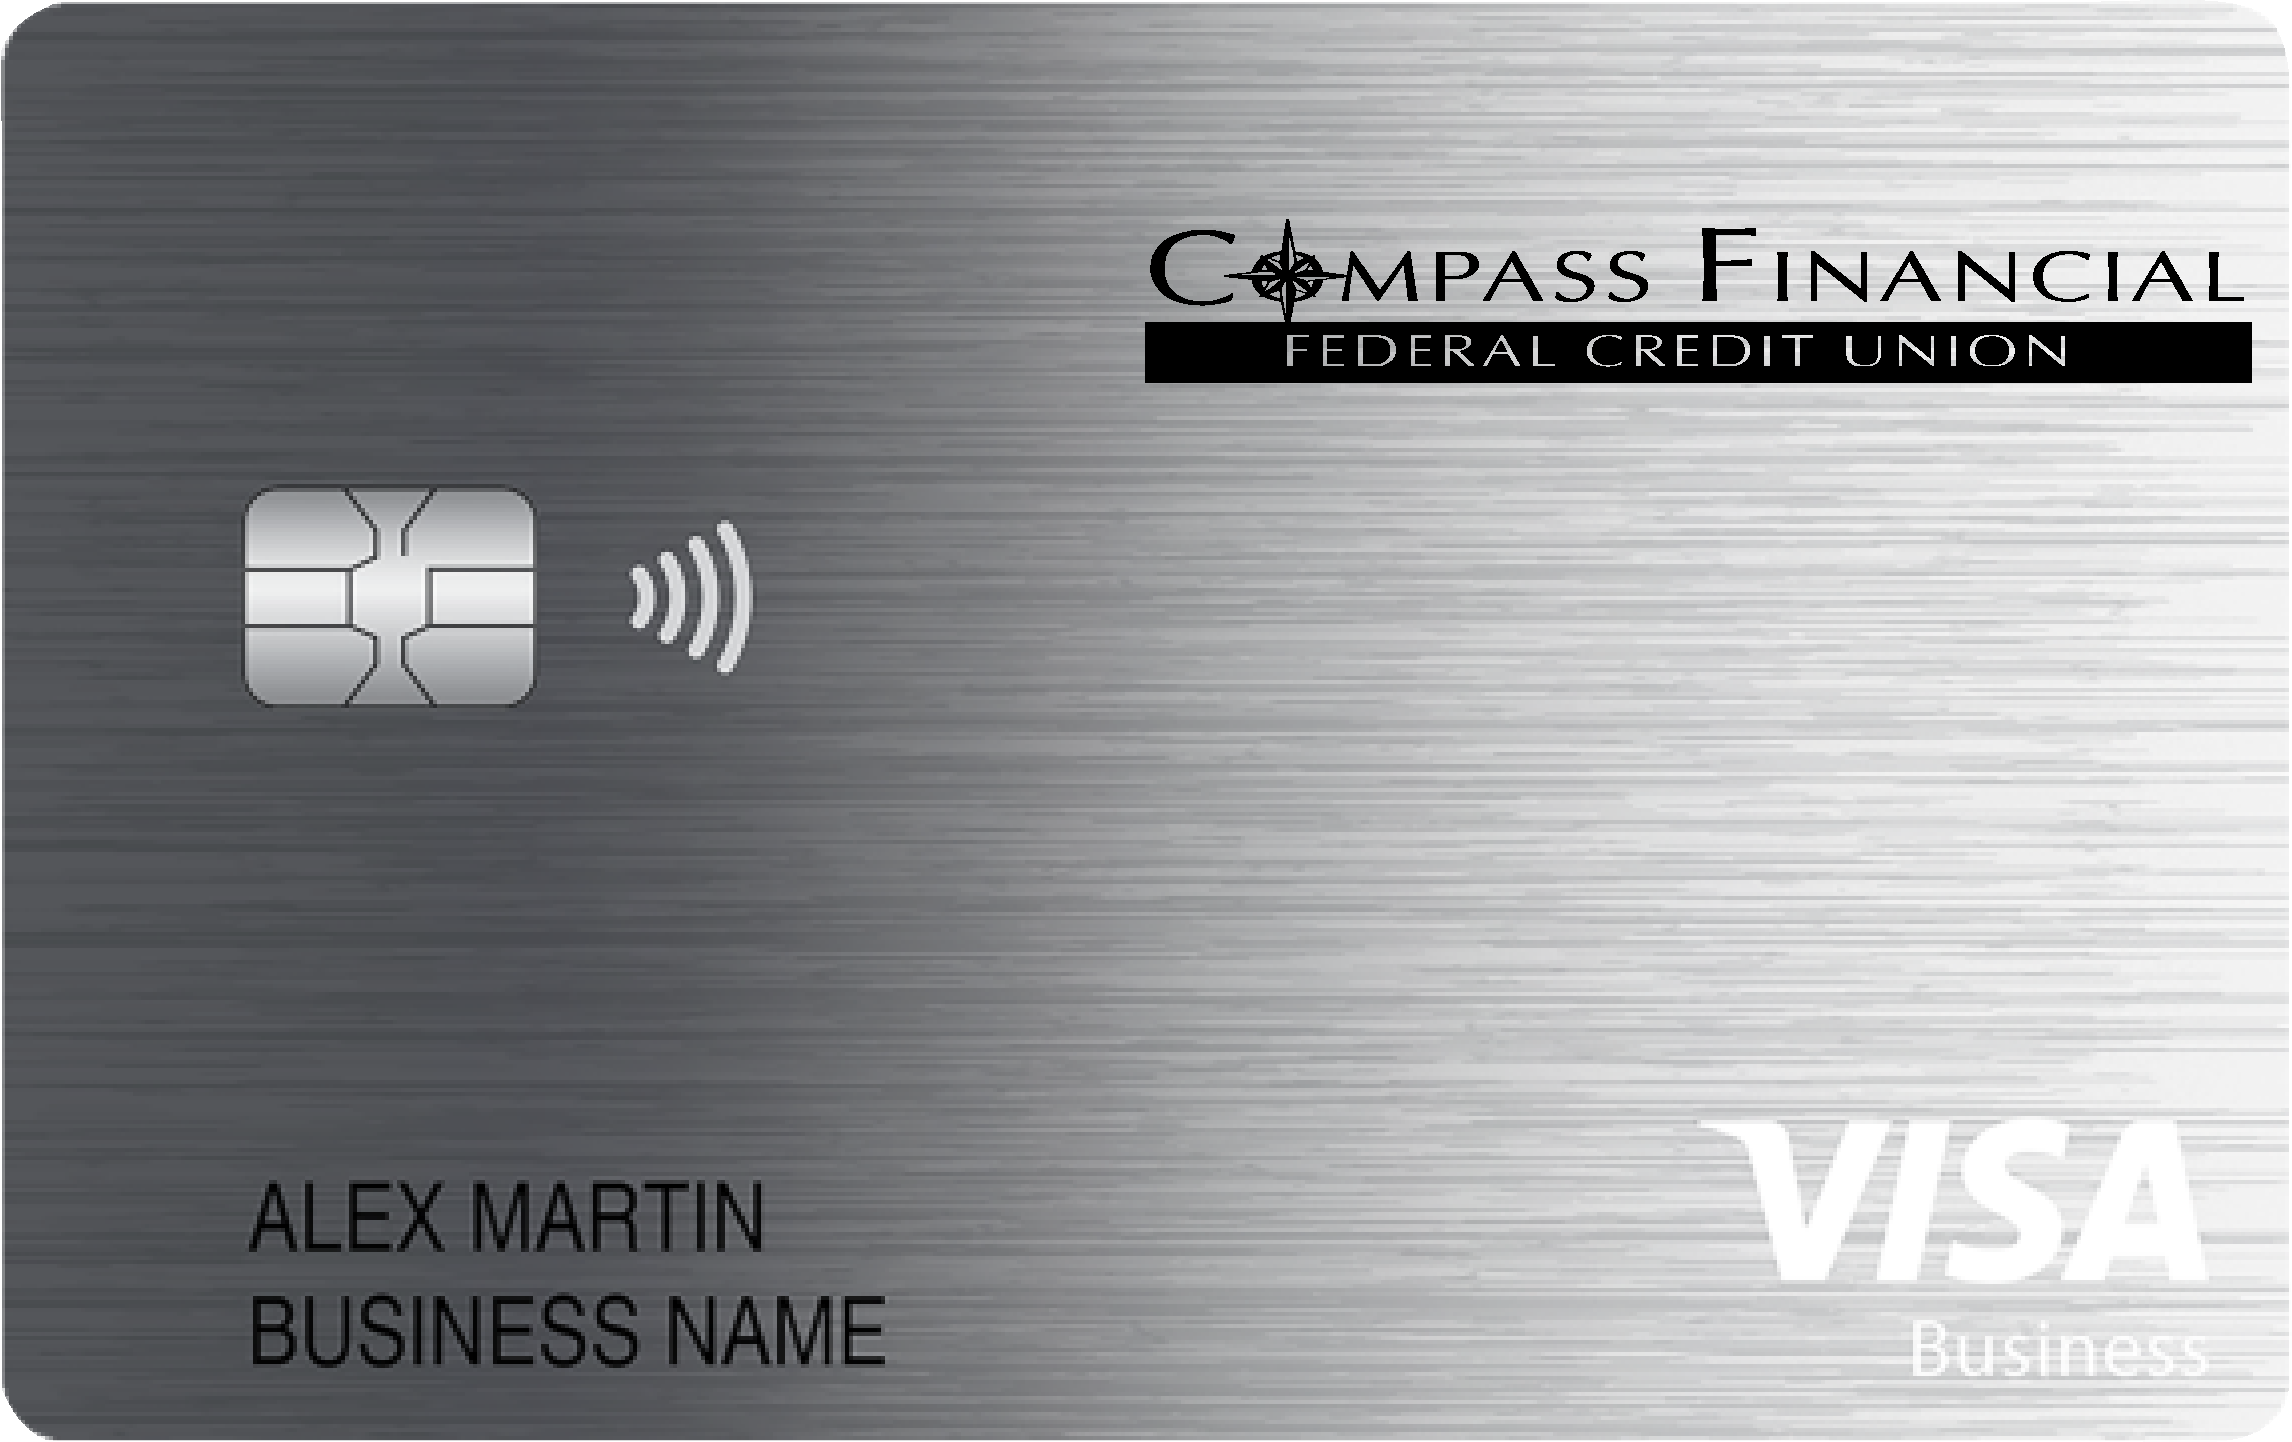 Compass Financial Federal Credit Union